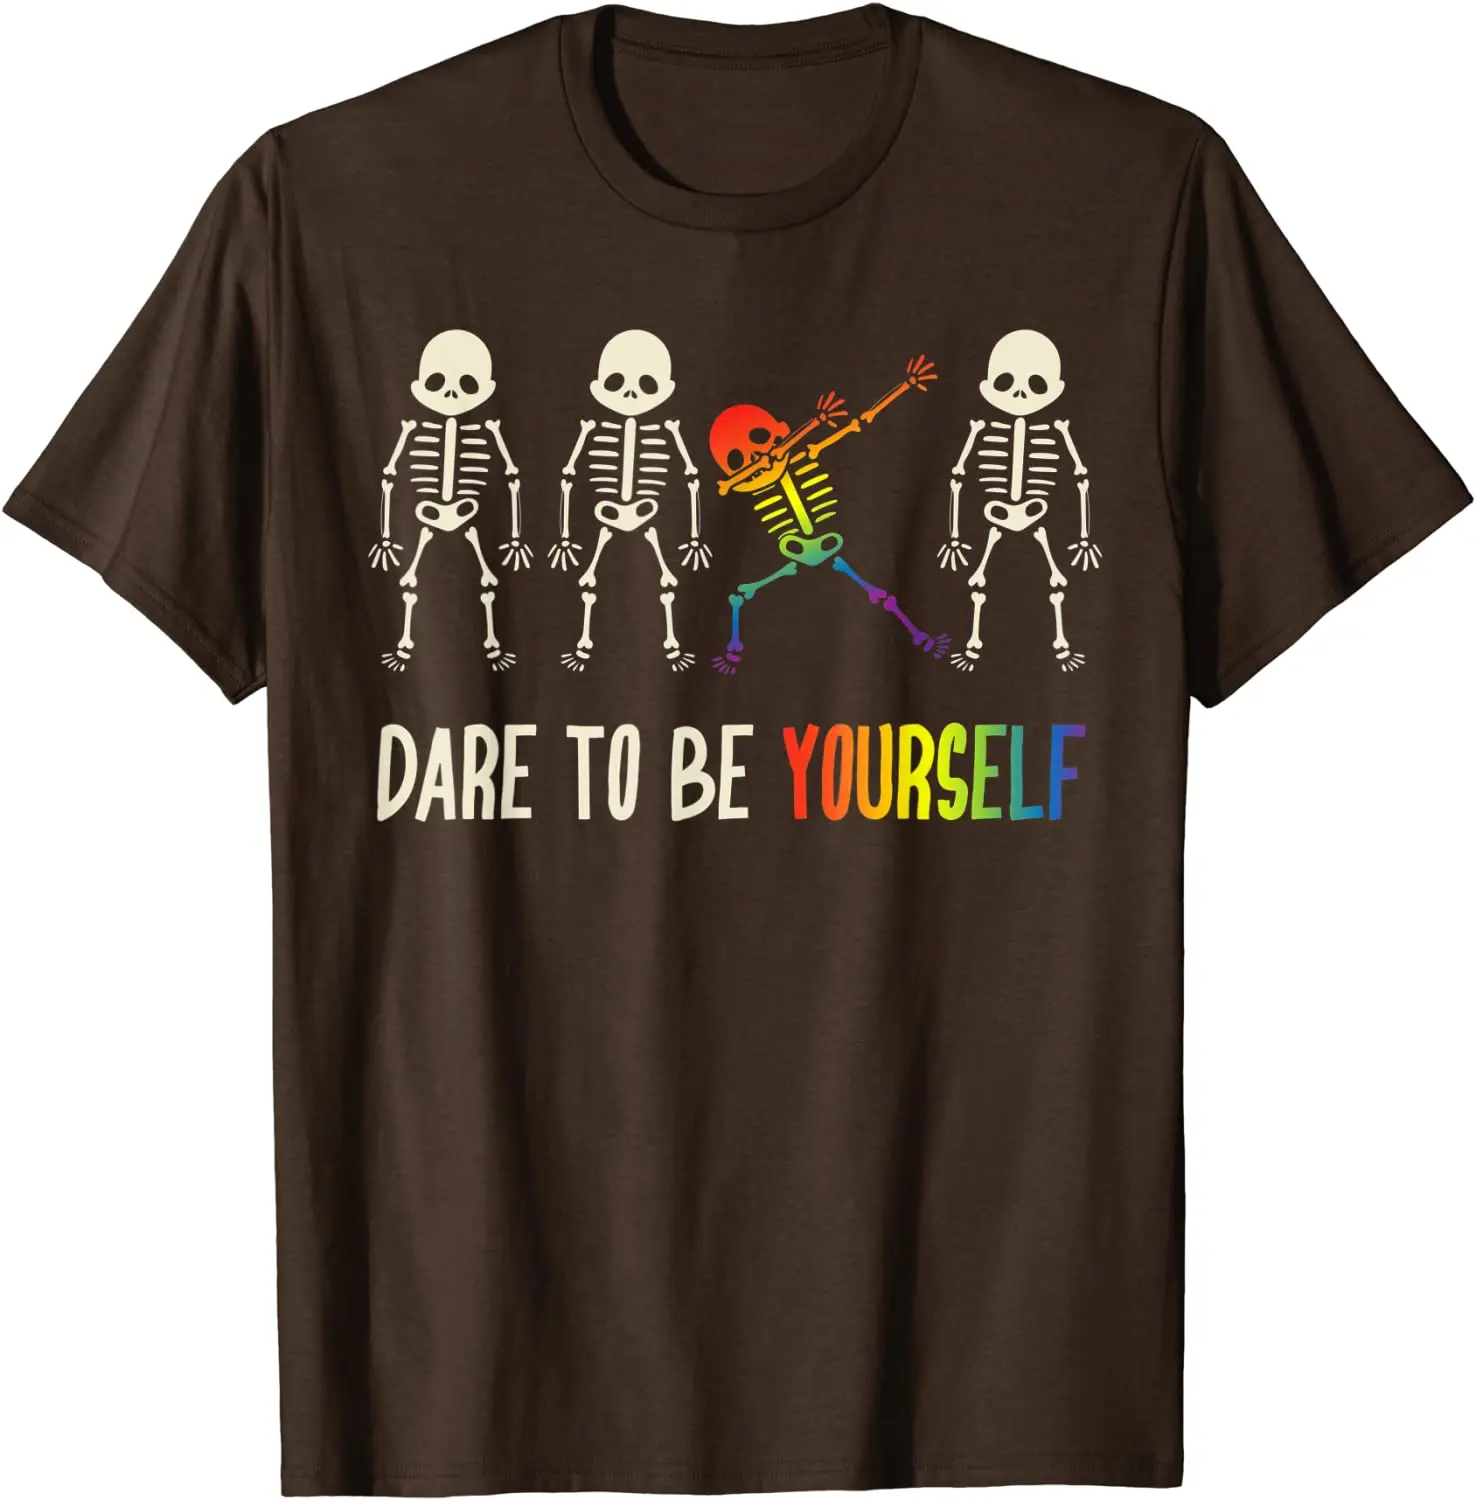 Dare To Be Yourself Cute LGBT Pride T-shirt Gift Short Sleeve Tees Fashion 100% Cotton O Neck Female Clothing Plus Size Casual